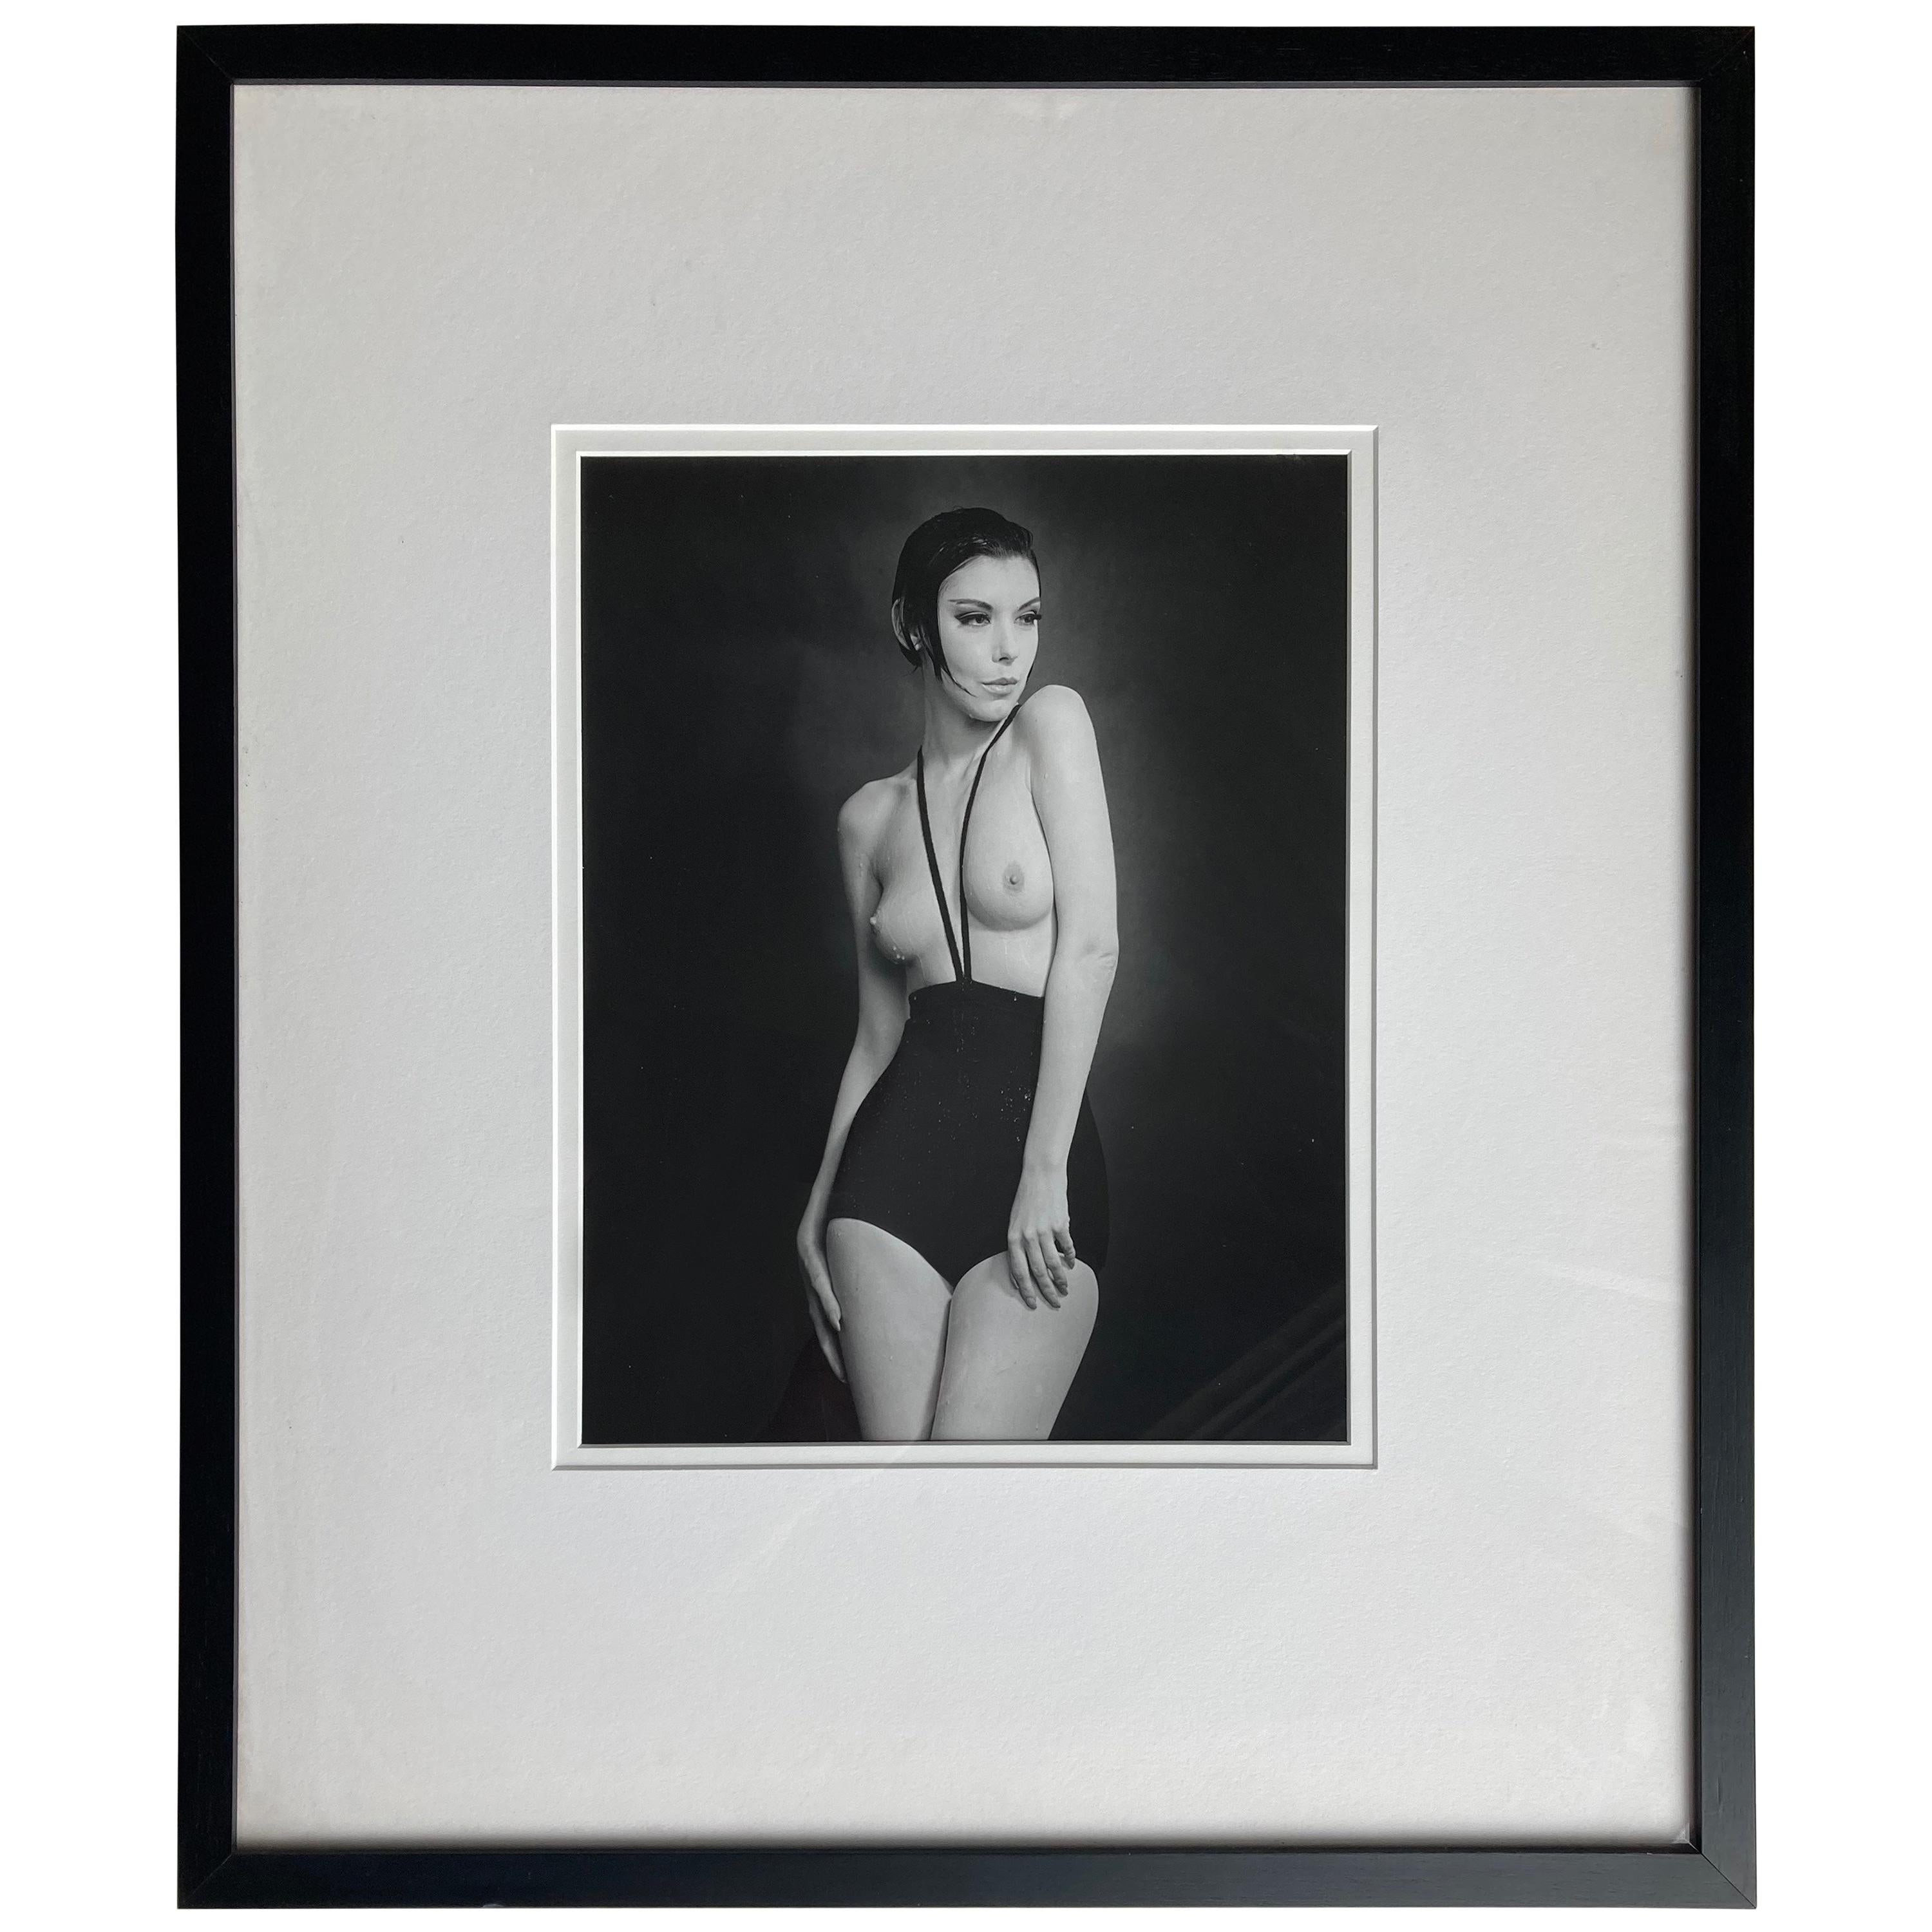 William Claxton Silver Gelatin Print of Peggy Moffit, Signed and Dated